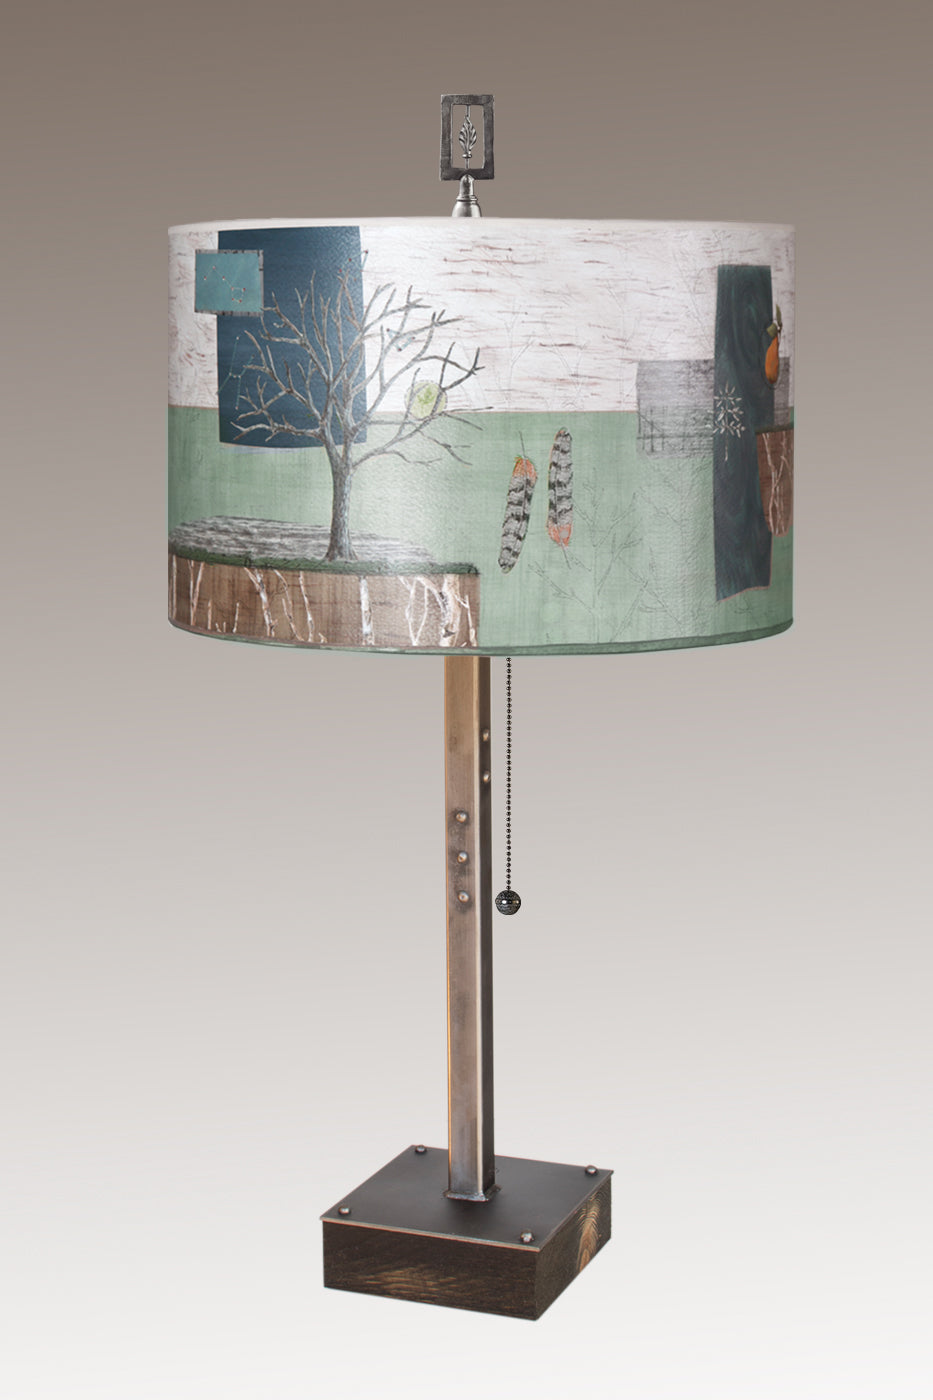 Steel Table Lamp on Wood with Large Drum Shade in Wander in Field